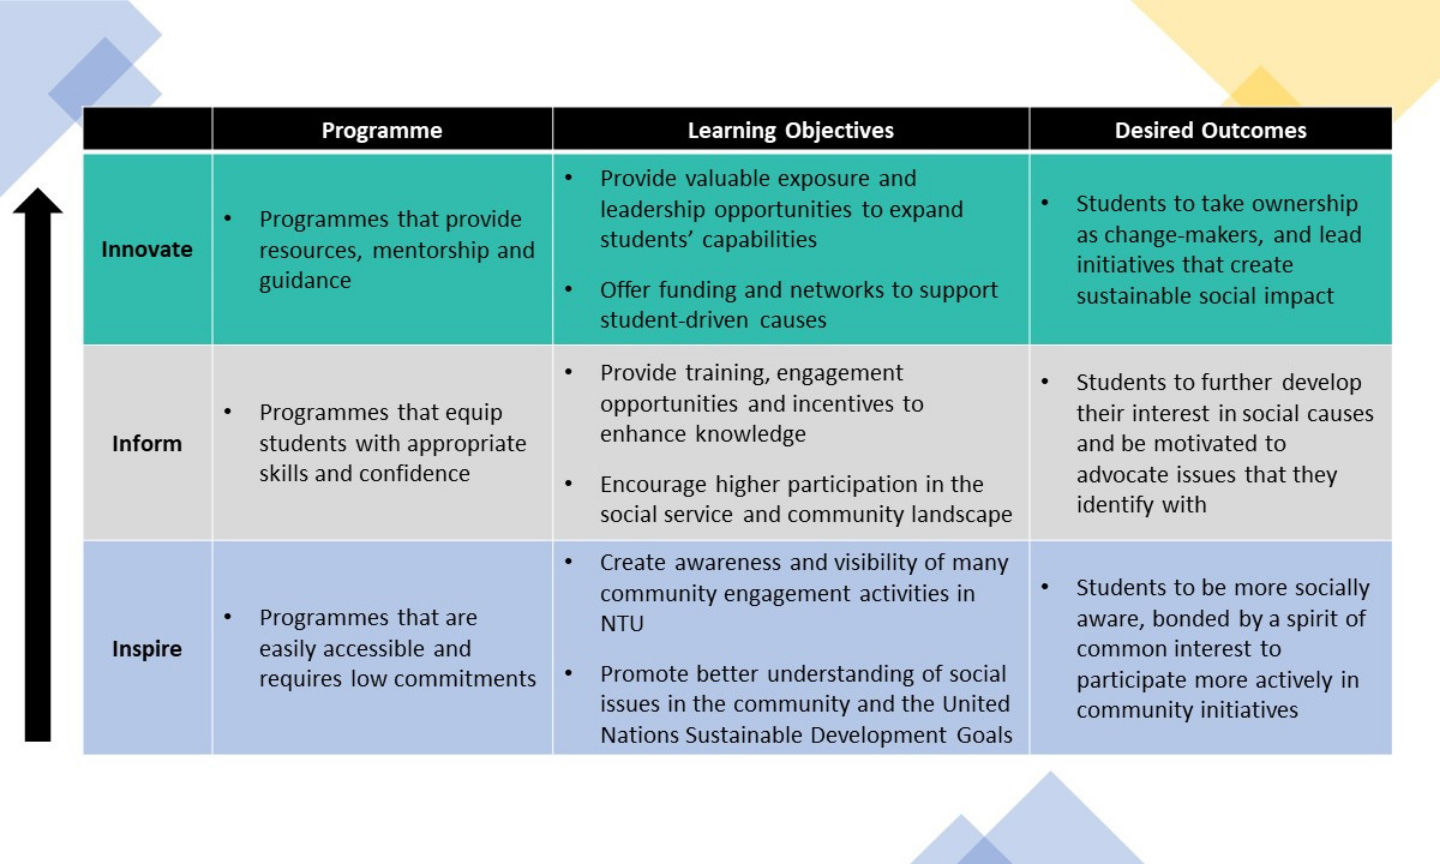 Learning Objectives and Desired Outcomes for Student Community Engagement Programmes